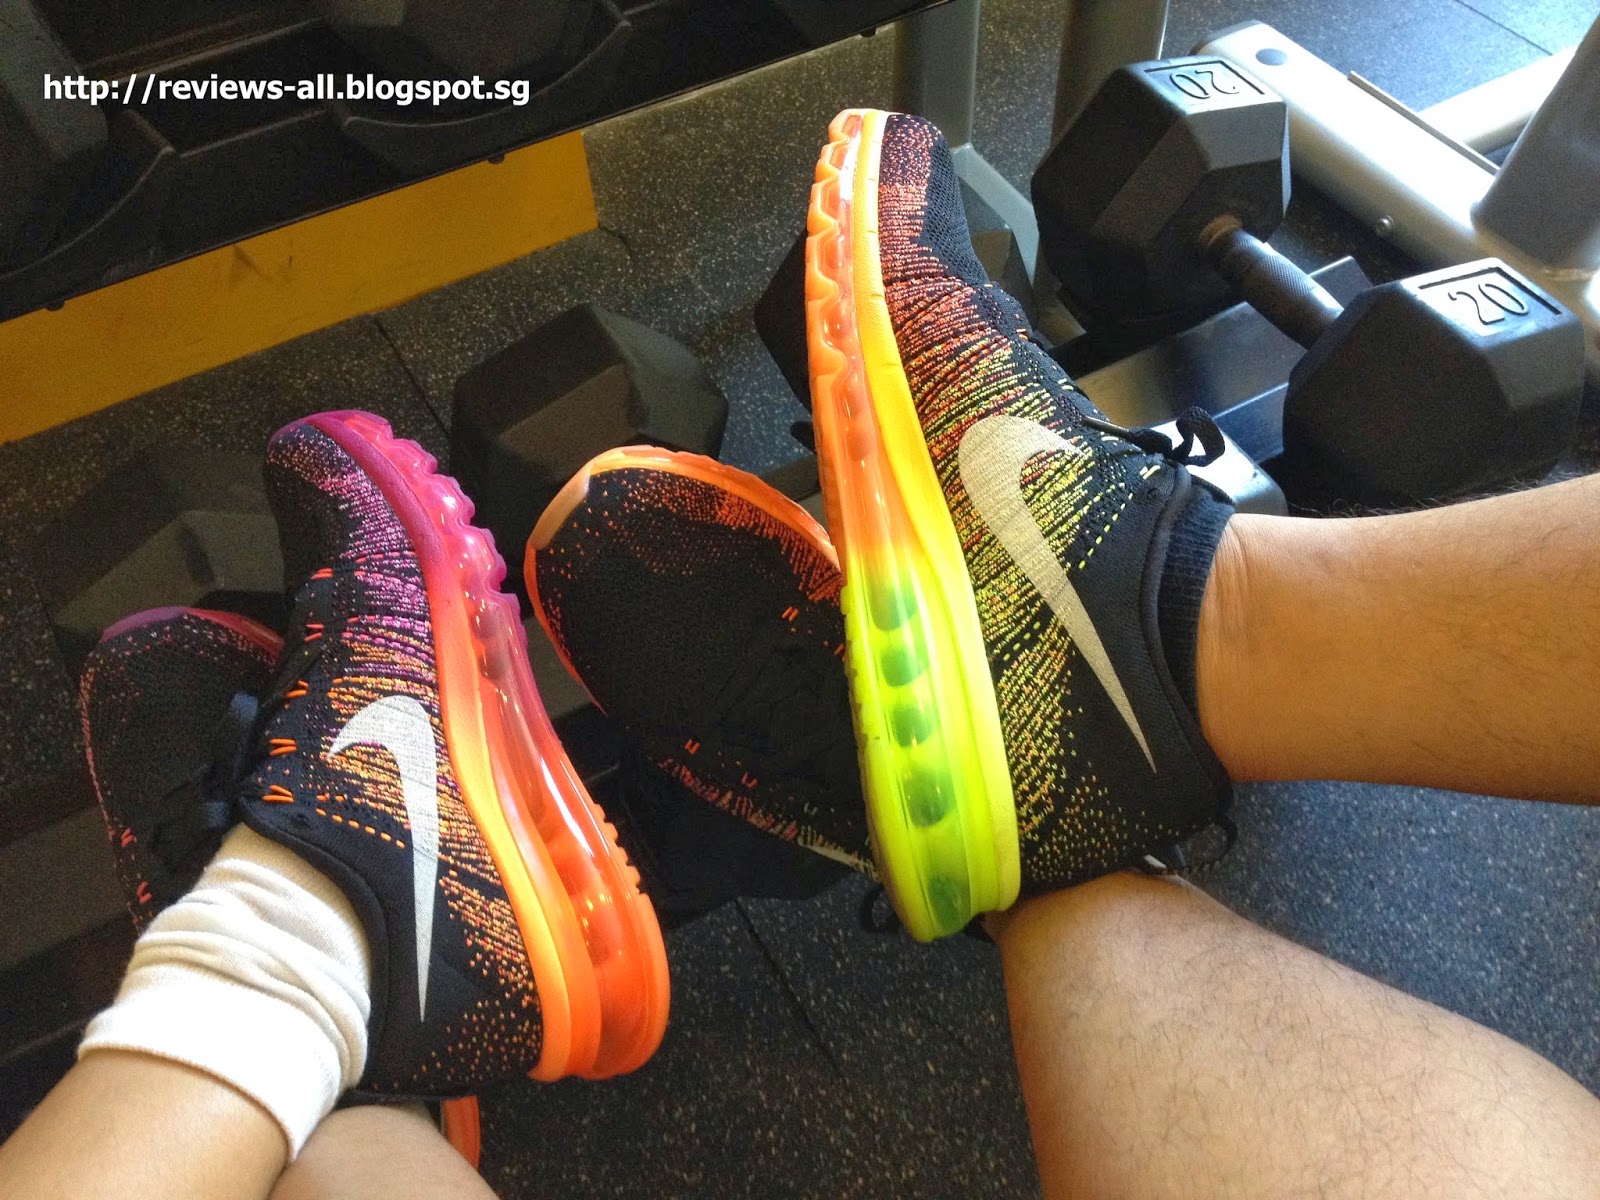 We'll Tell You A&W Couple's Blog: Nike Flyknit Airmax 2014 - His and Her Shoes